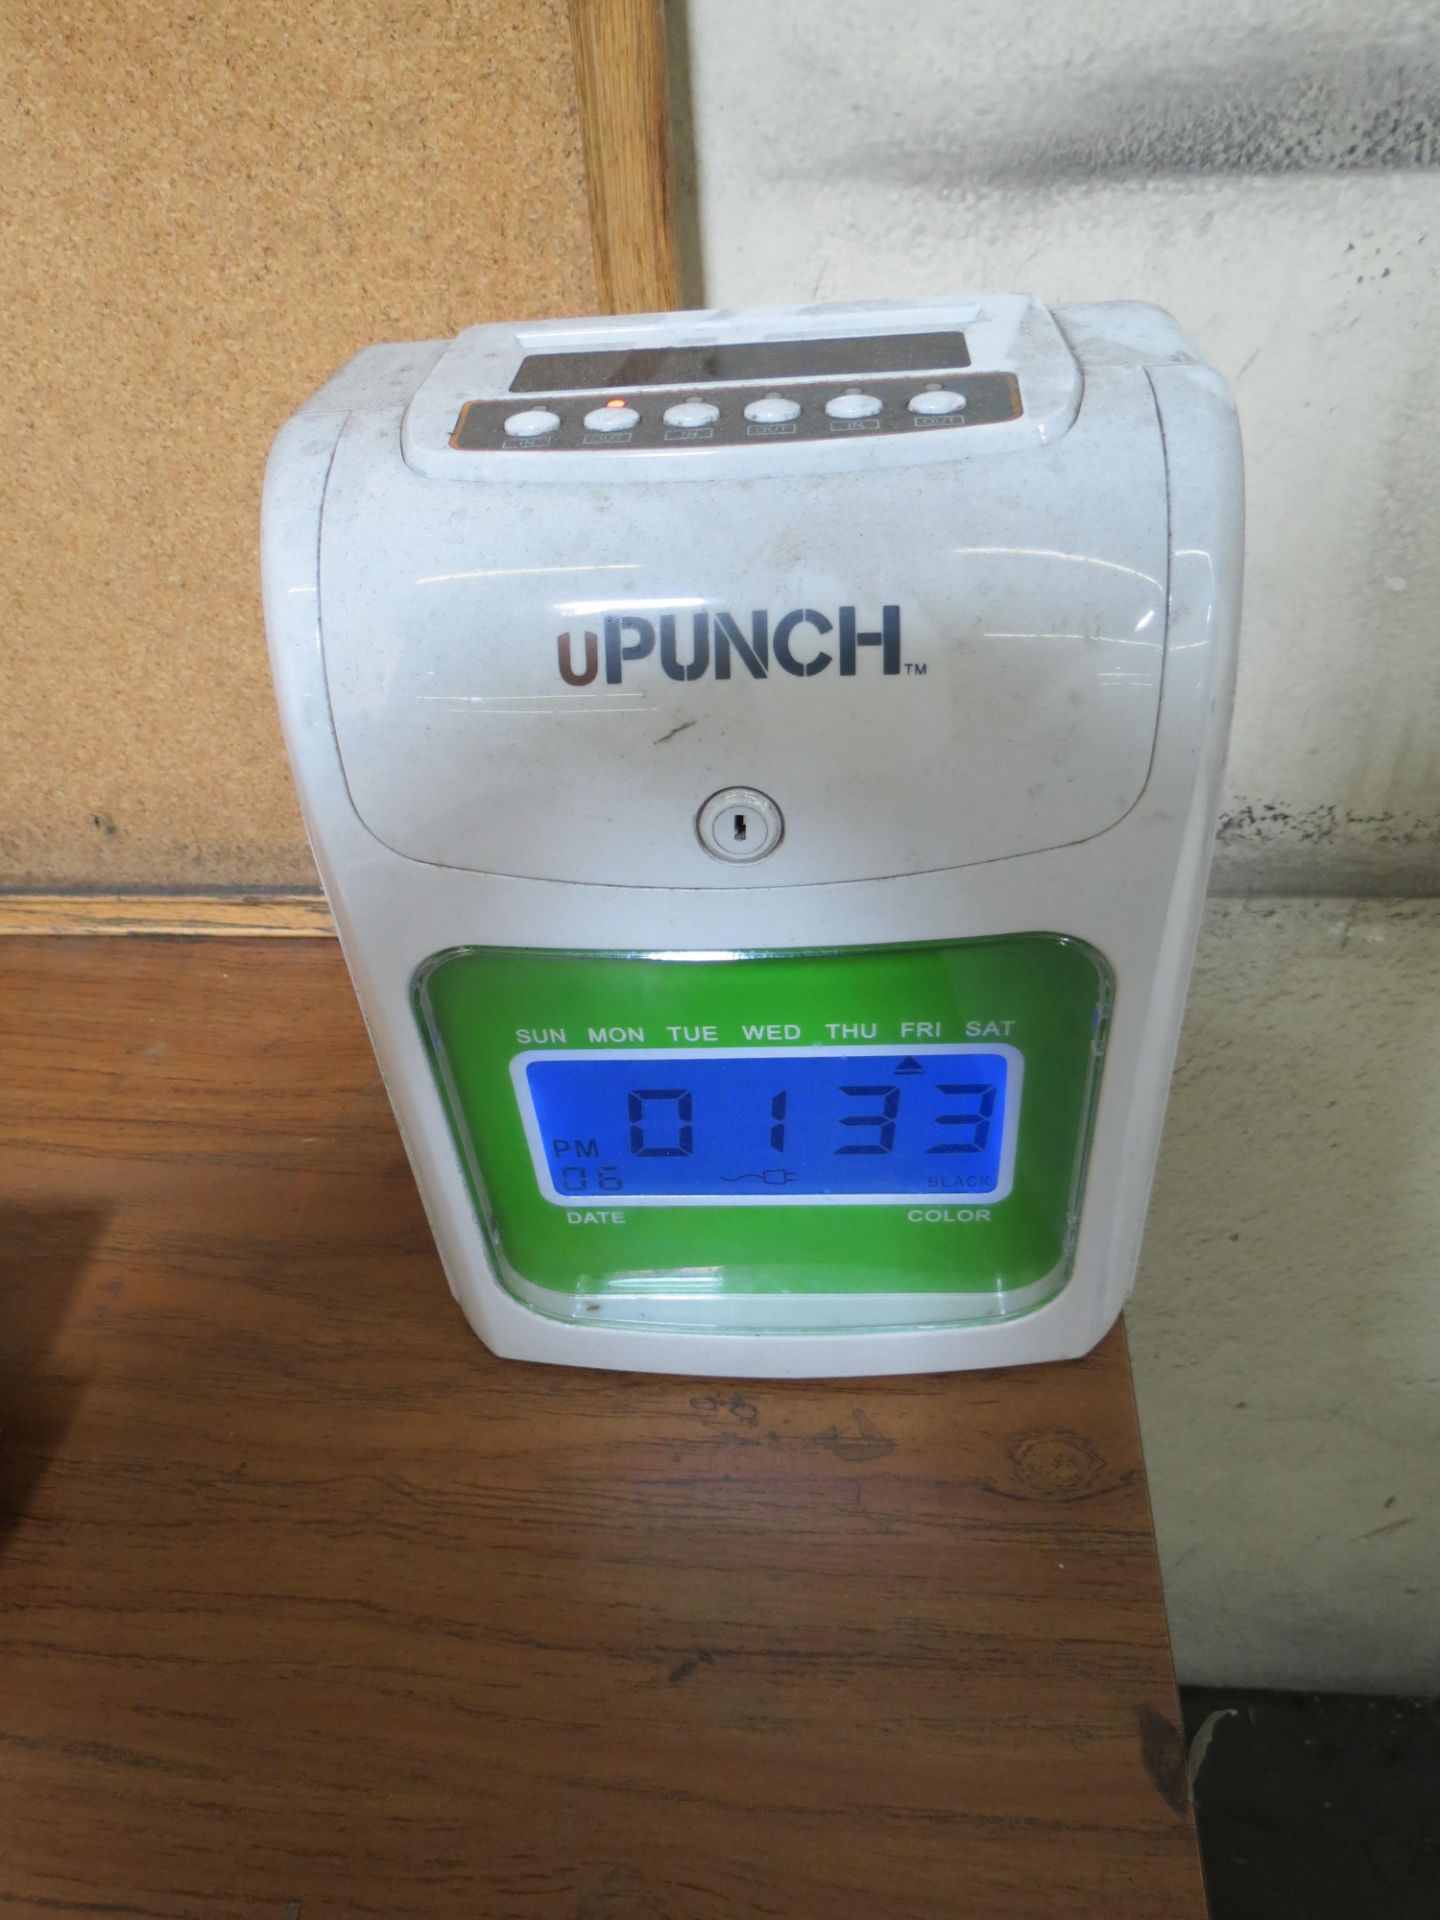 Upunch HN300 Employee Time Clock with 2-Card Racks and Punch Cards - Image 2 of 4